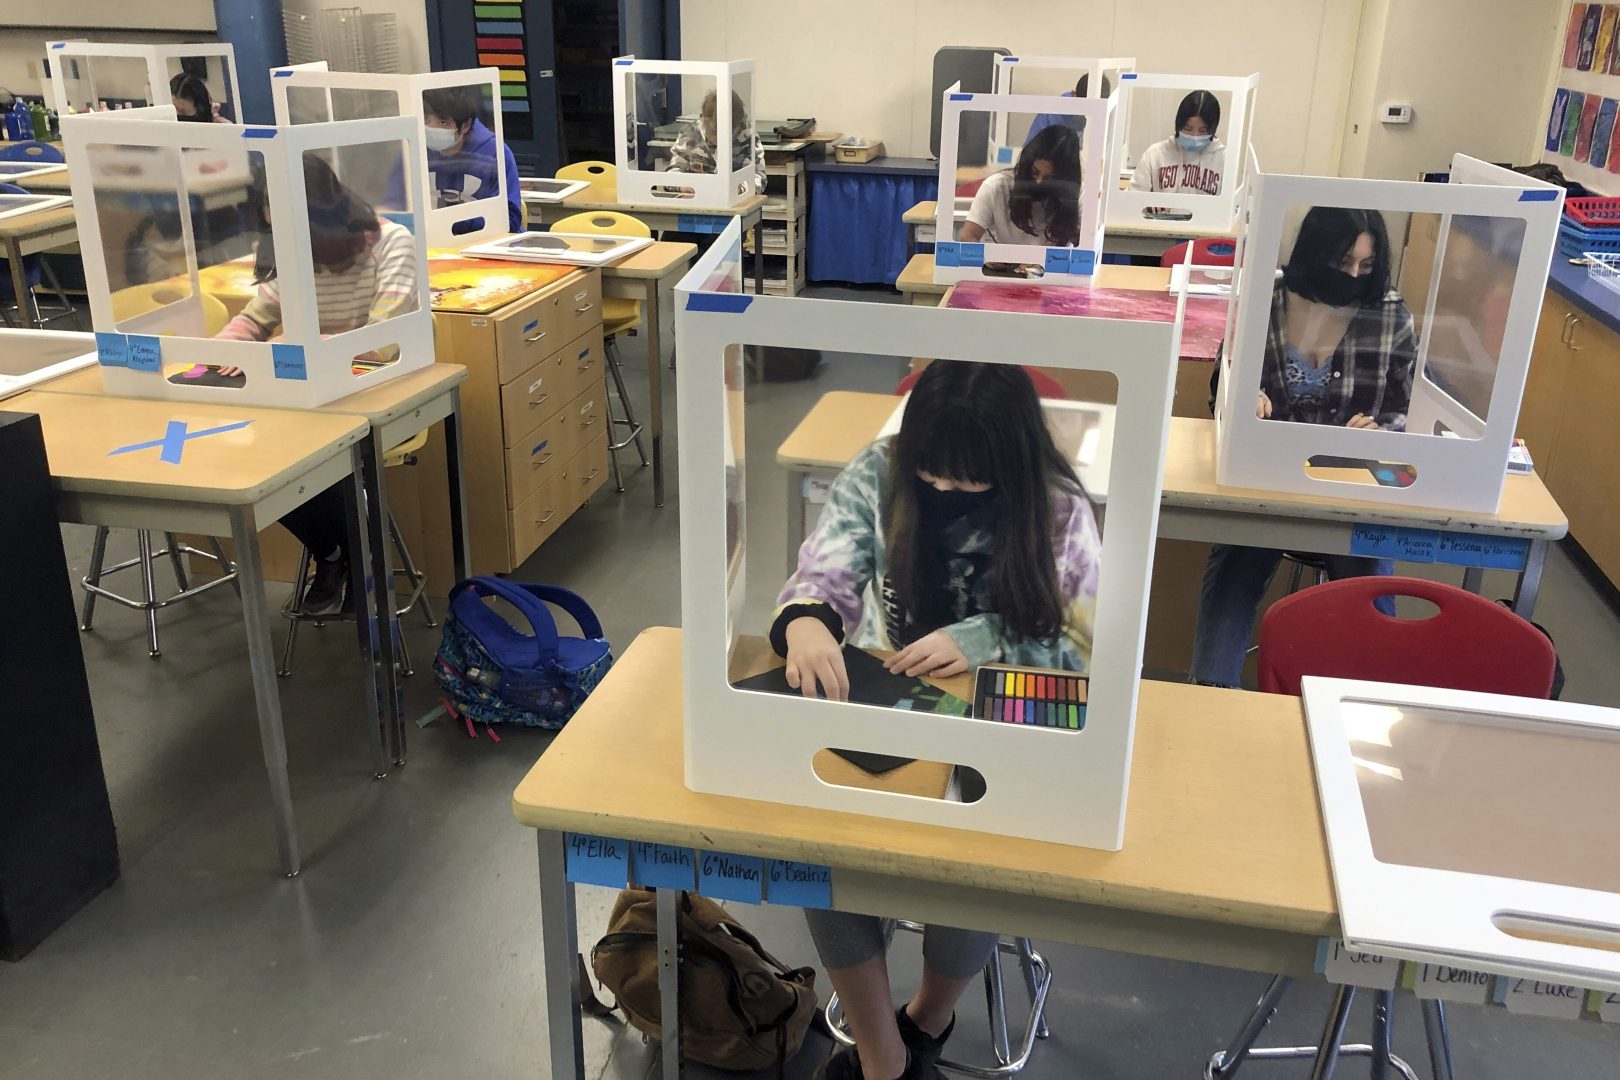 FILE PHOTO: In this March 2, 2021, file photo, socially distanced, and with protective partitions, students work on an art project during class at the Sinaloa Middle School in Novato, Calif.